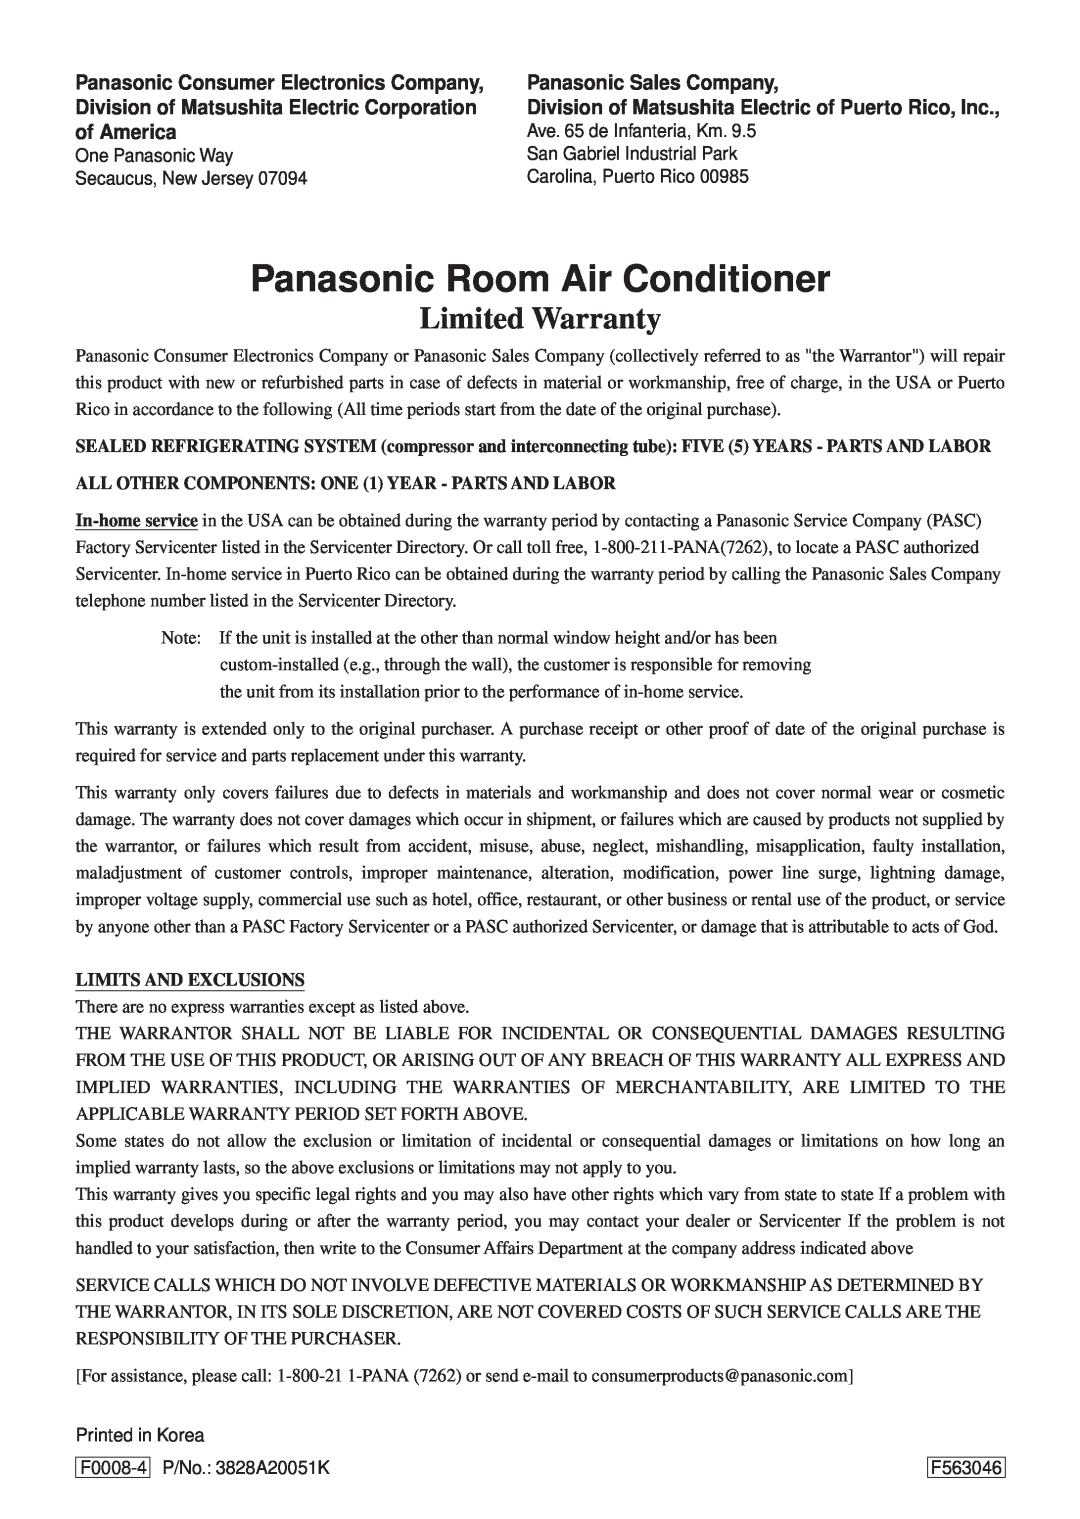 Panasonic HQ-2051RH manual Panasonic Room Air Conditioner, Limited Warranty, Limits And Exclusions 